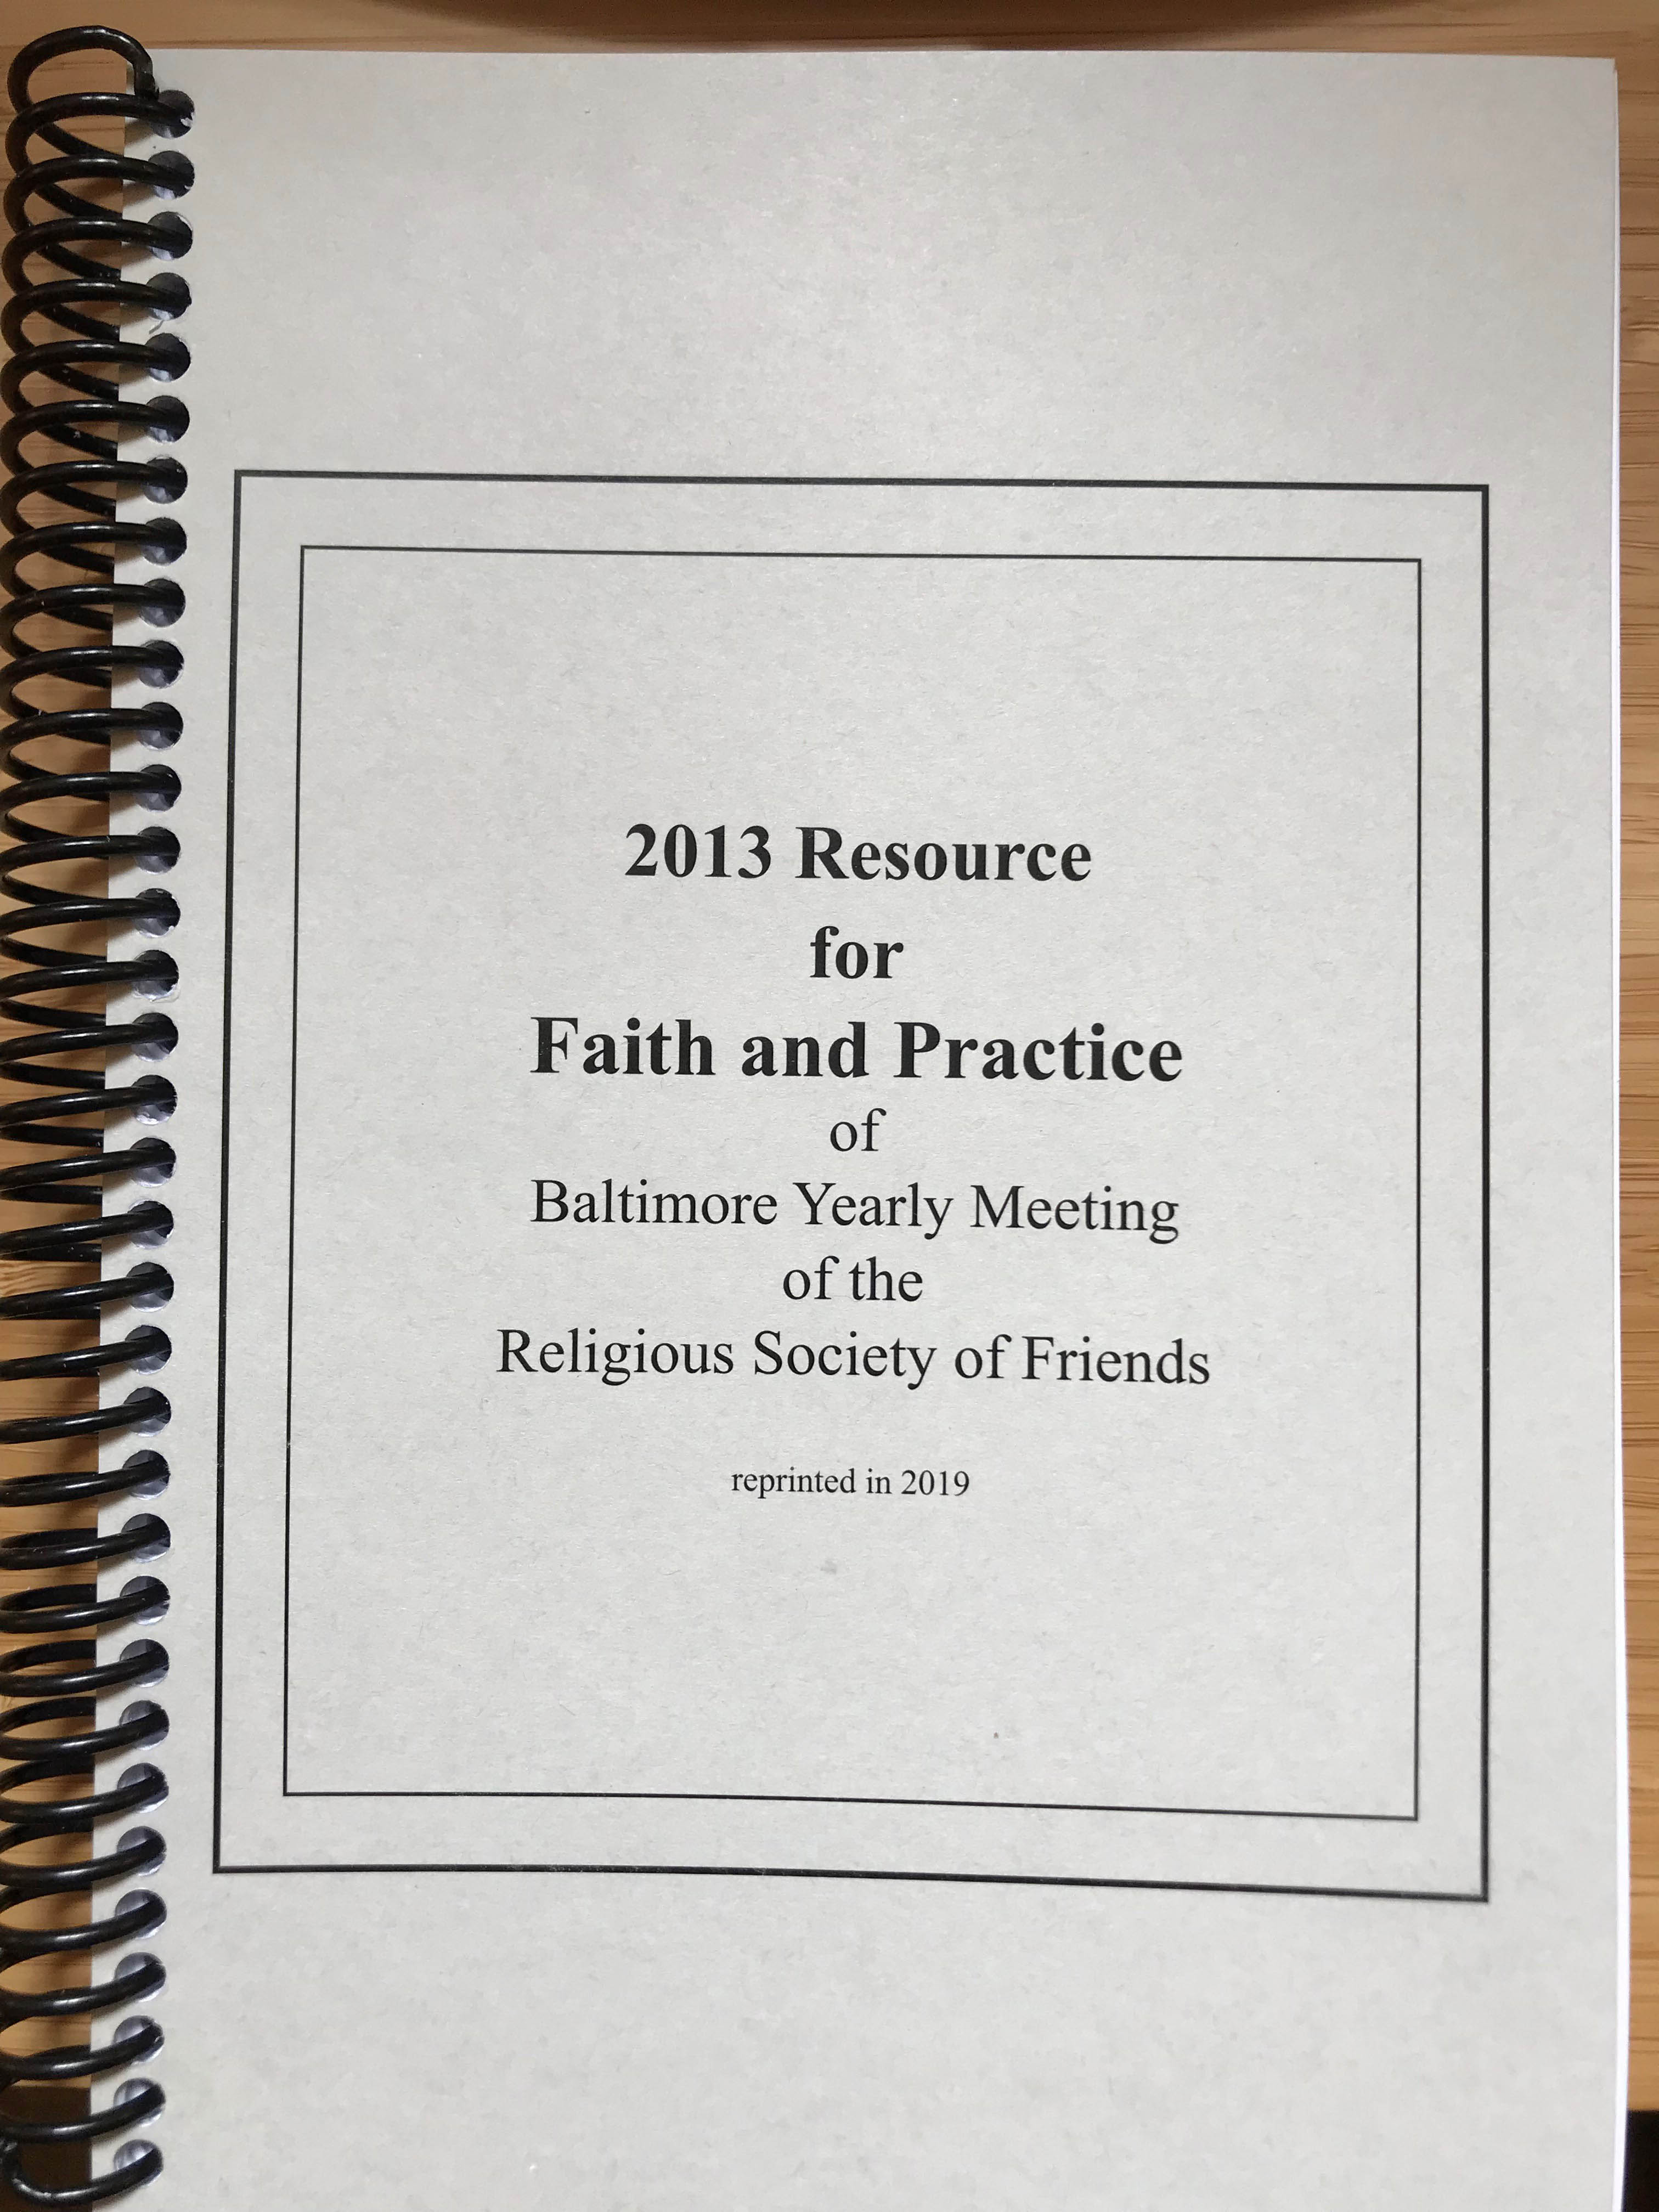 2013 Resource to Faith and Practice